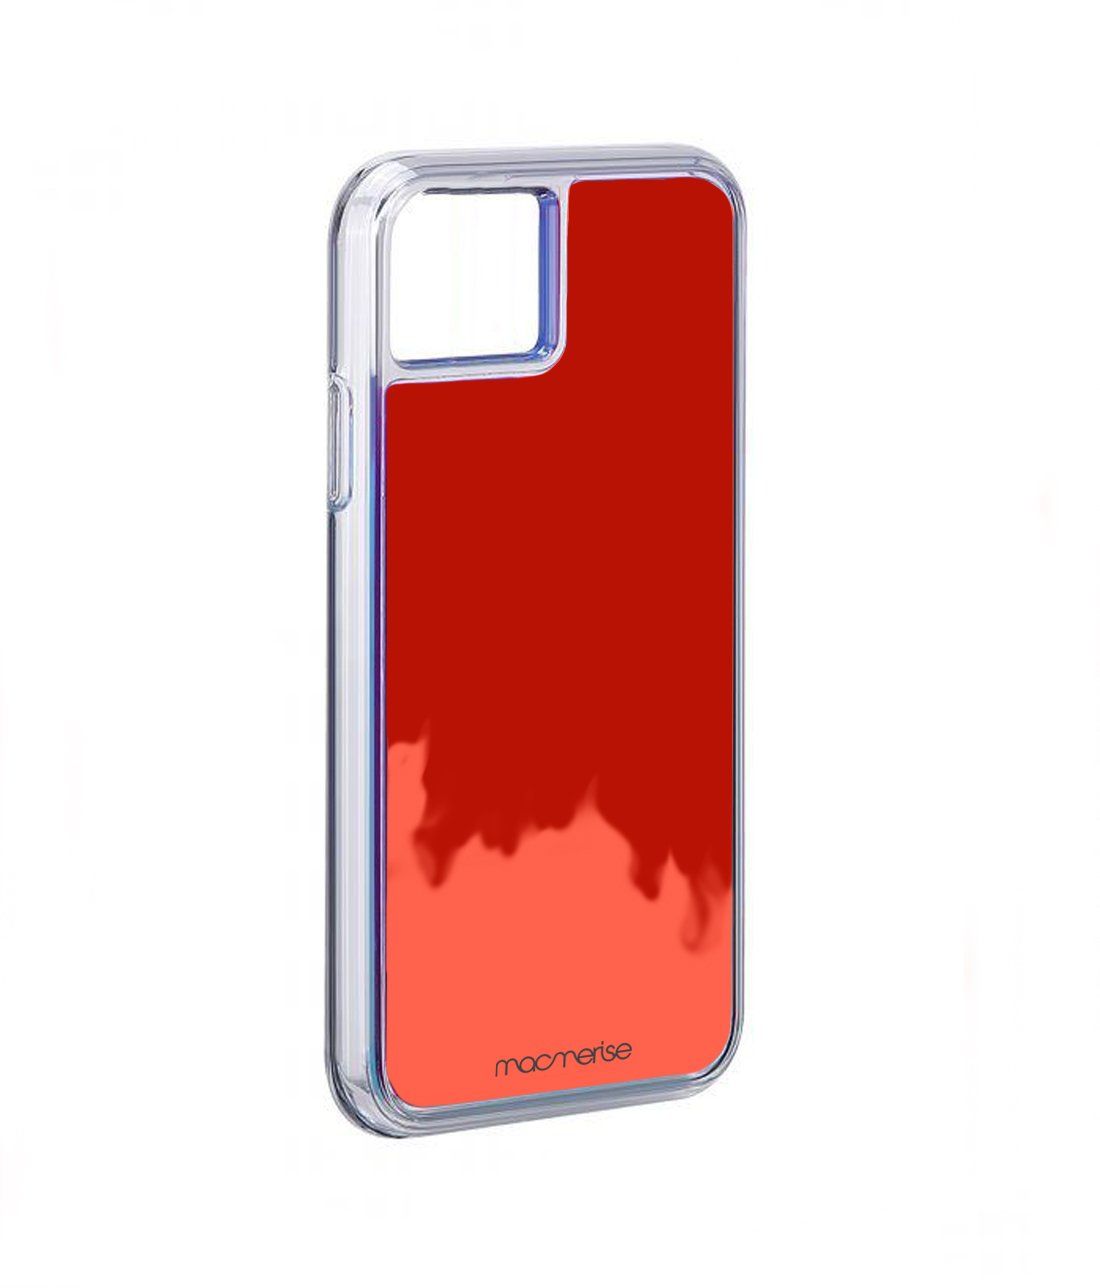 Neon Sand Red - Neon Sand Phone Case for iPhone 11 Pro Max